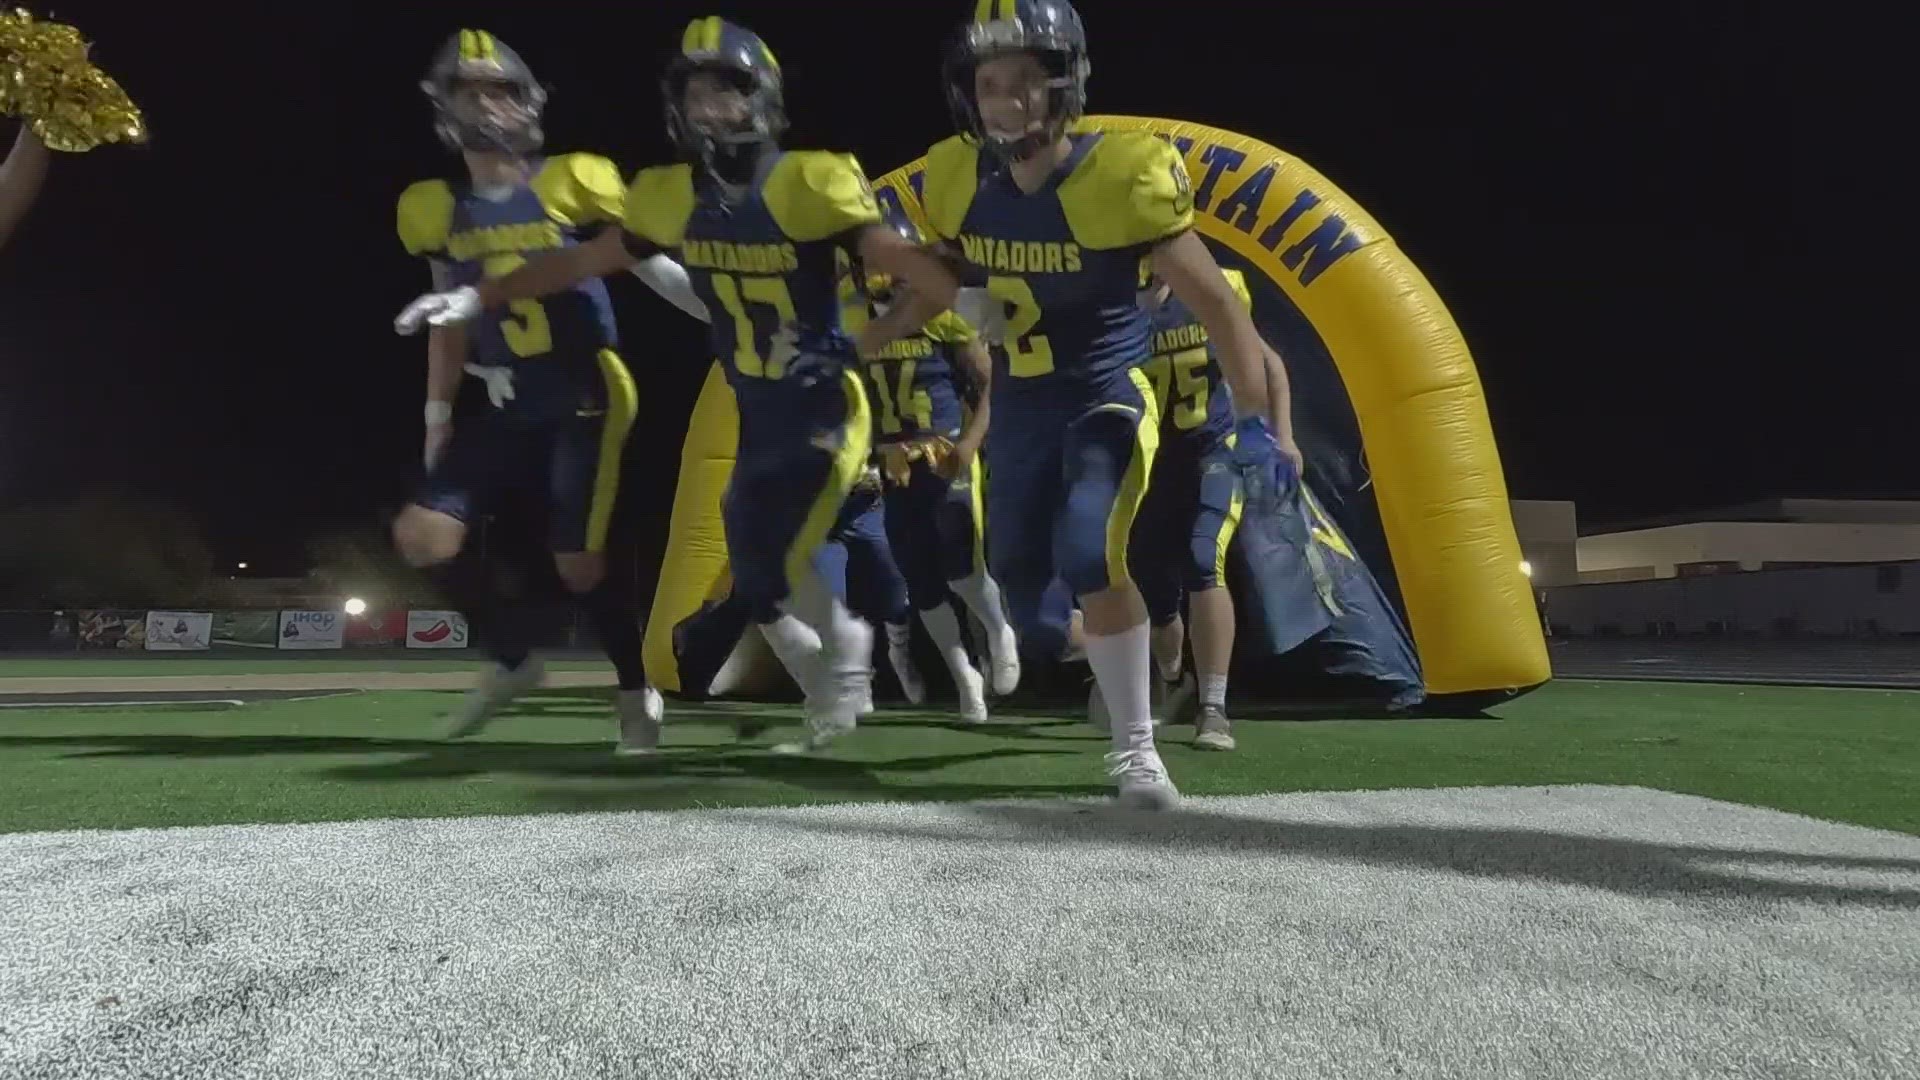 Shadow Mountain demolished Valley Lutheran on homecoming, 85-0